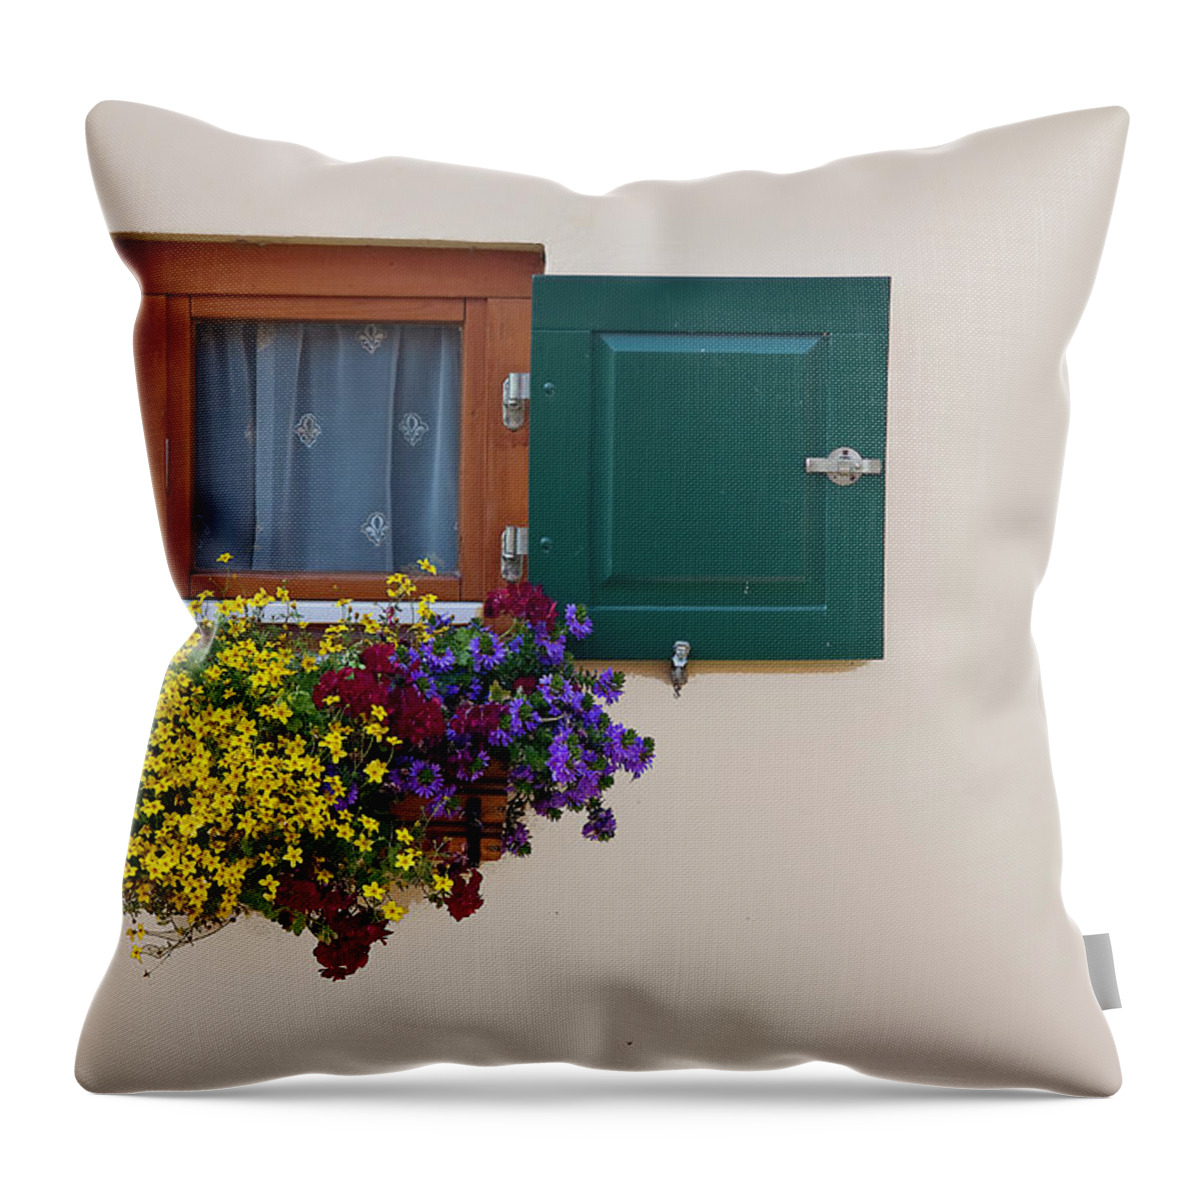 Outdoors Throw Pillow featuring the photograph Window With Flowers by Enzo D.